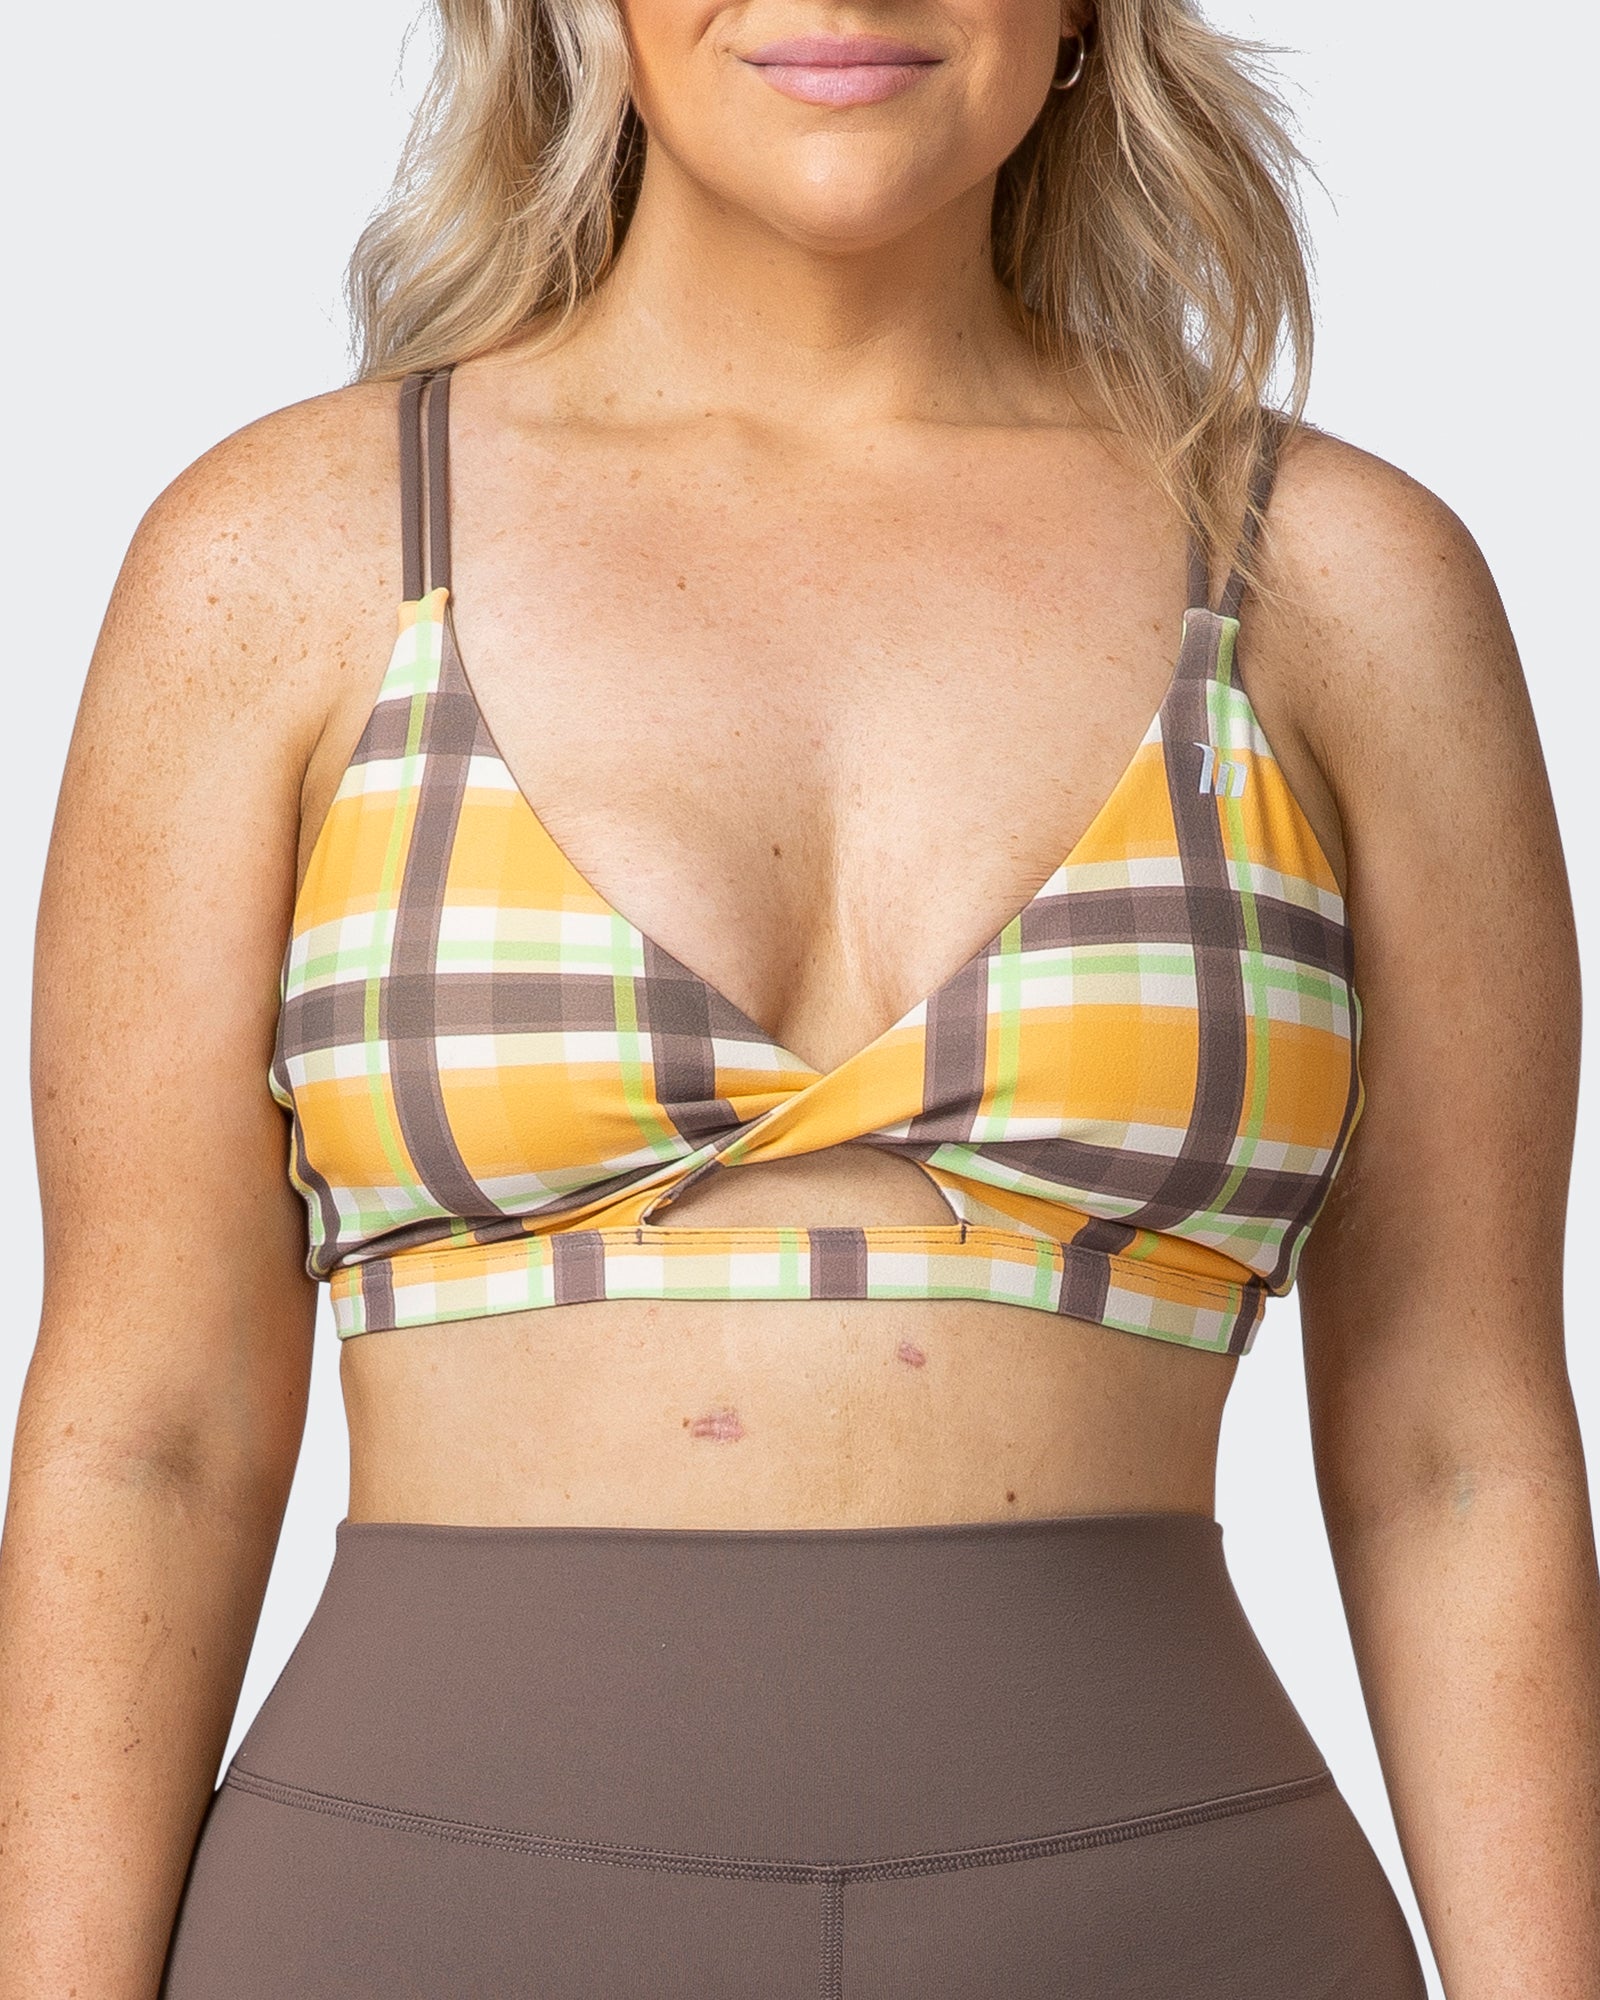 musclenation Sports Bra WHIRLWIND BRALETTE Checked Out Print